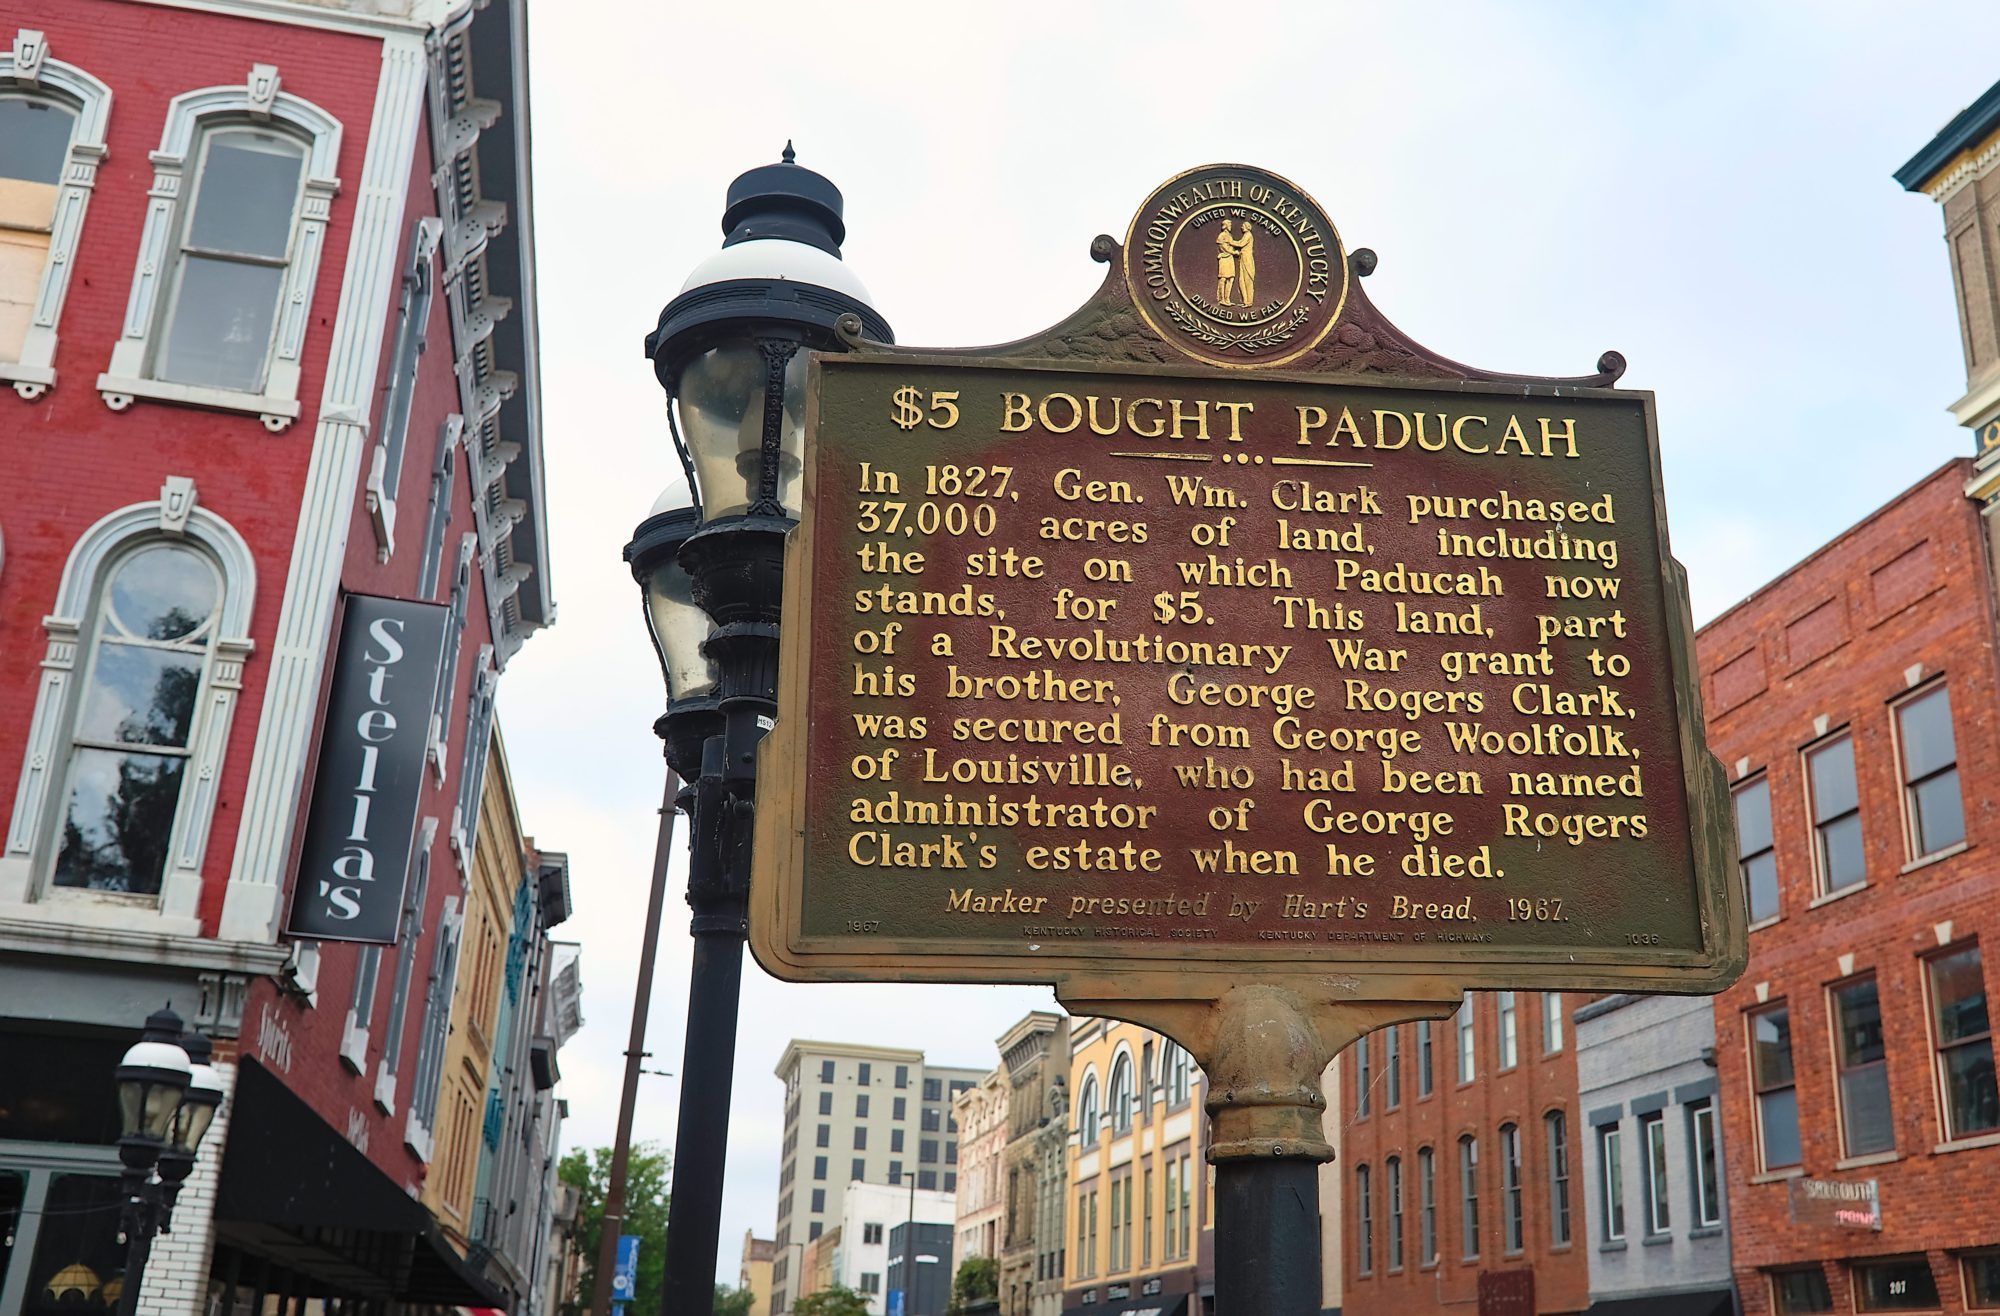 A historical marker in downtown Paducah